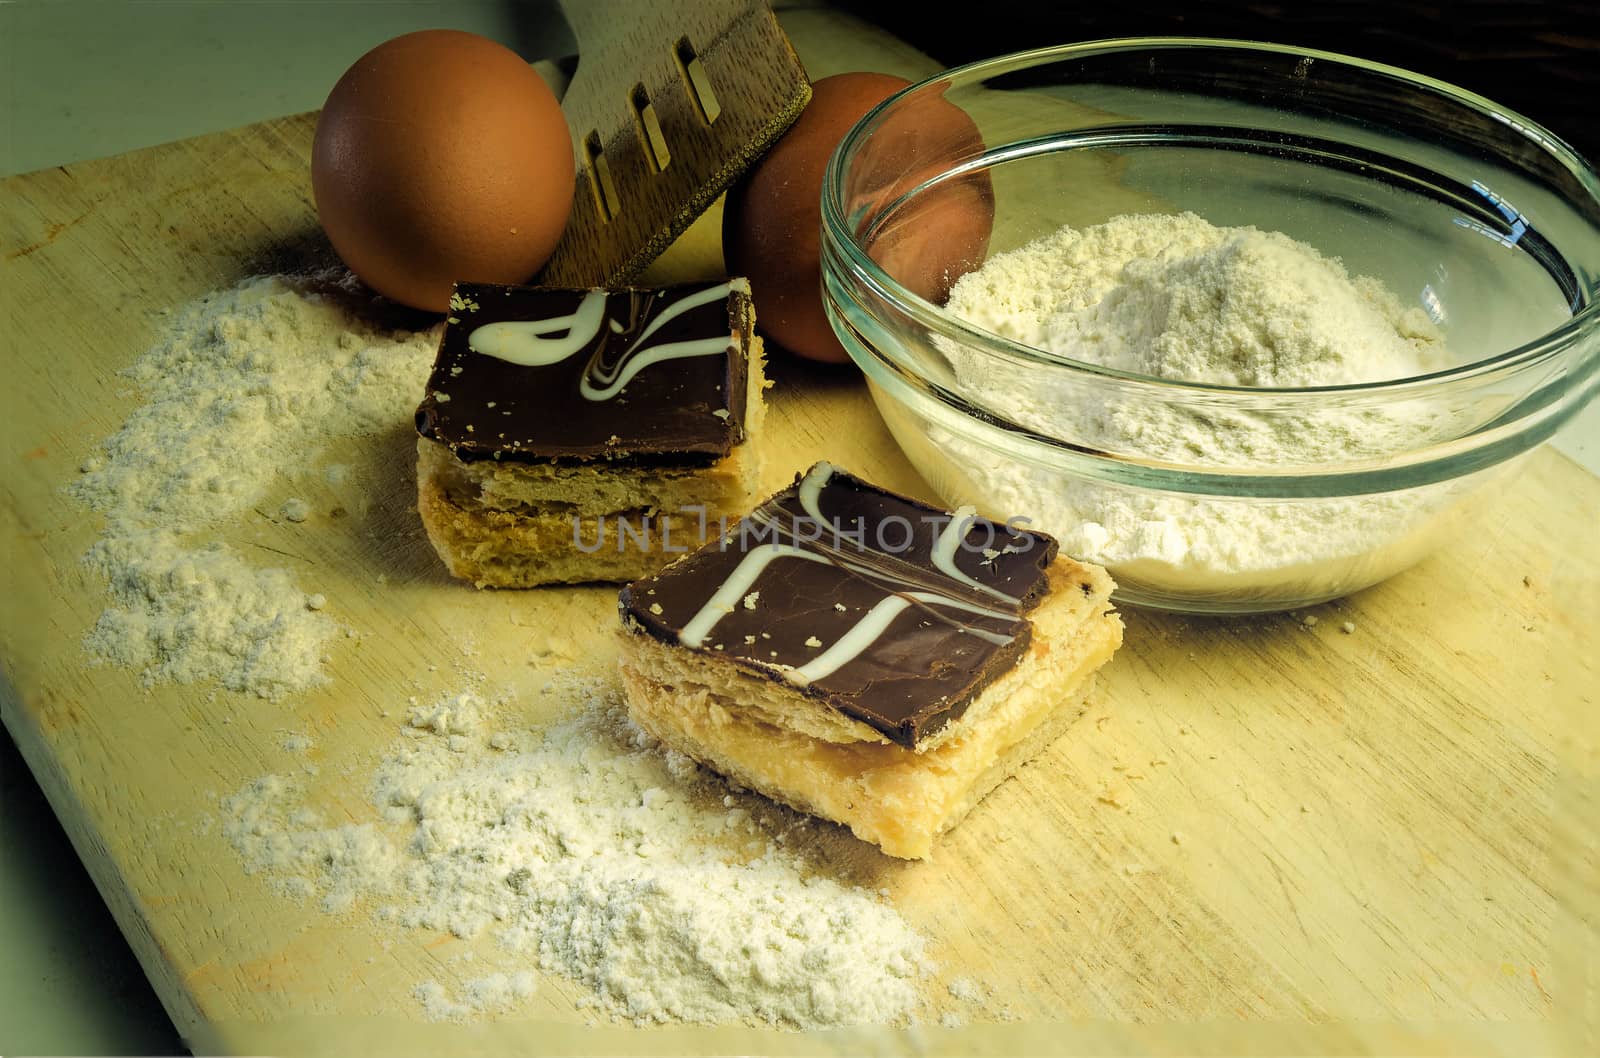 Strudel cake with cream and chocolate with eggs and flour ingredients